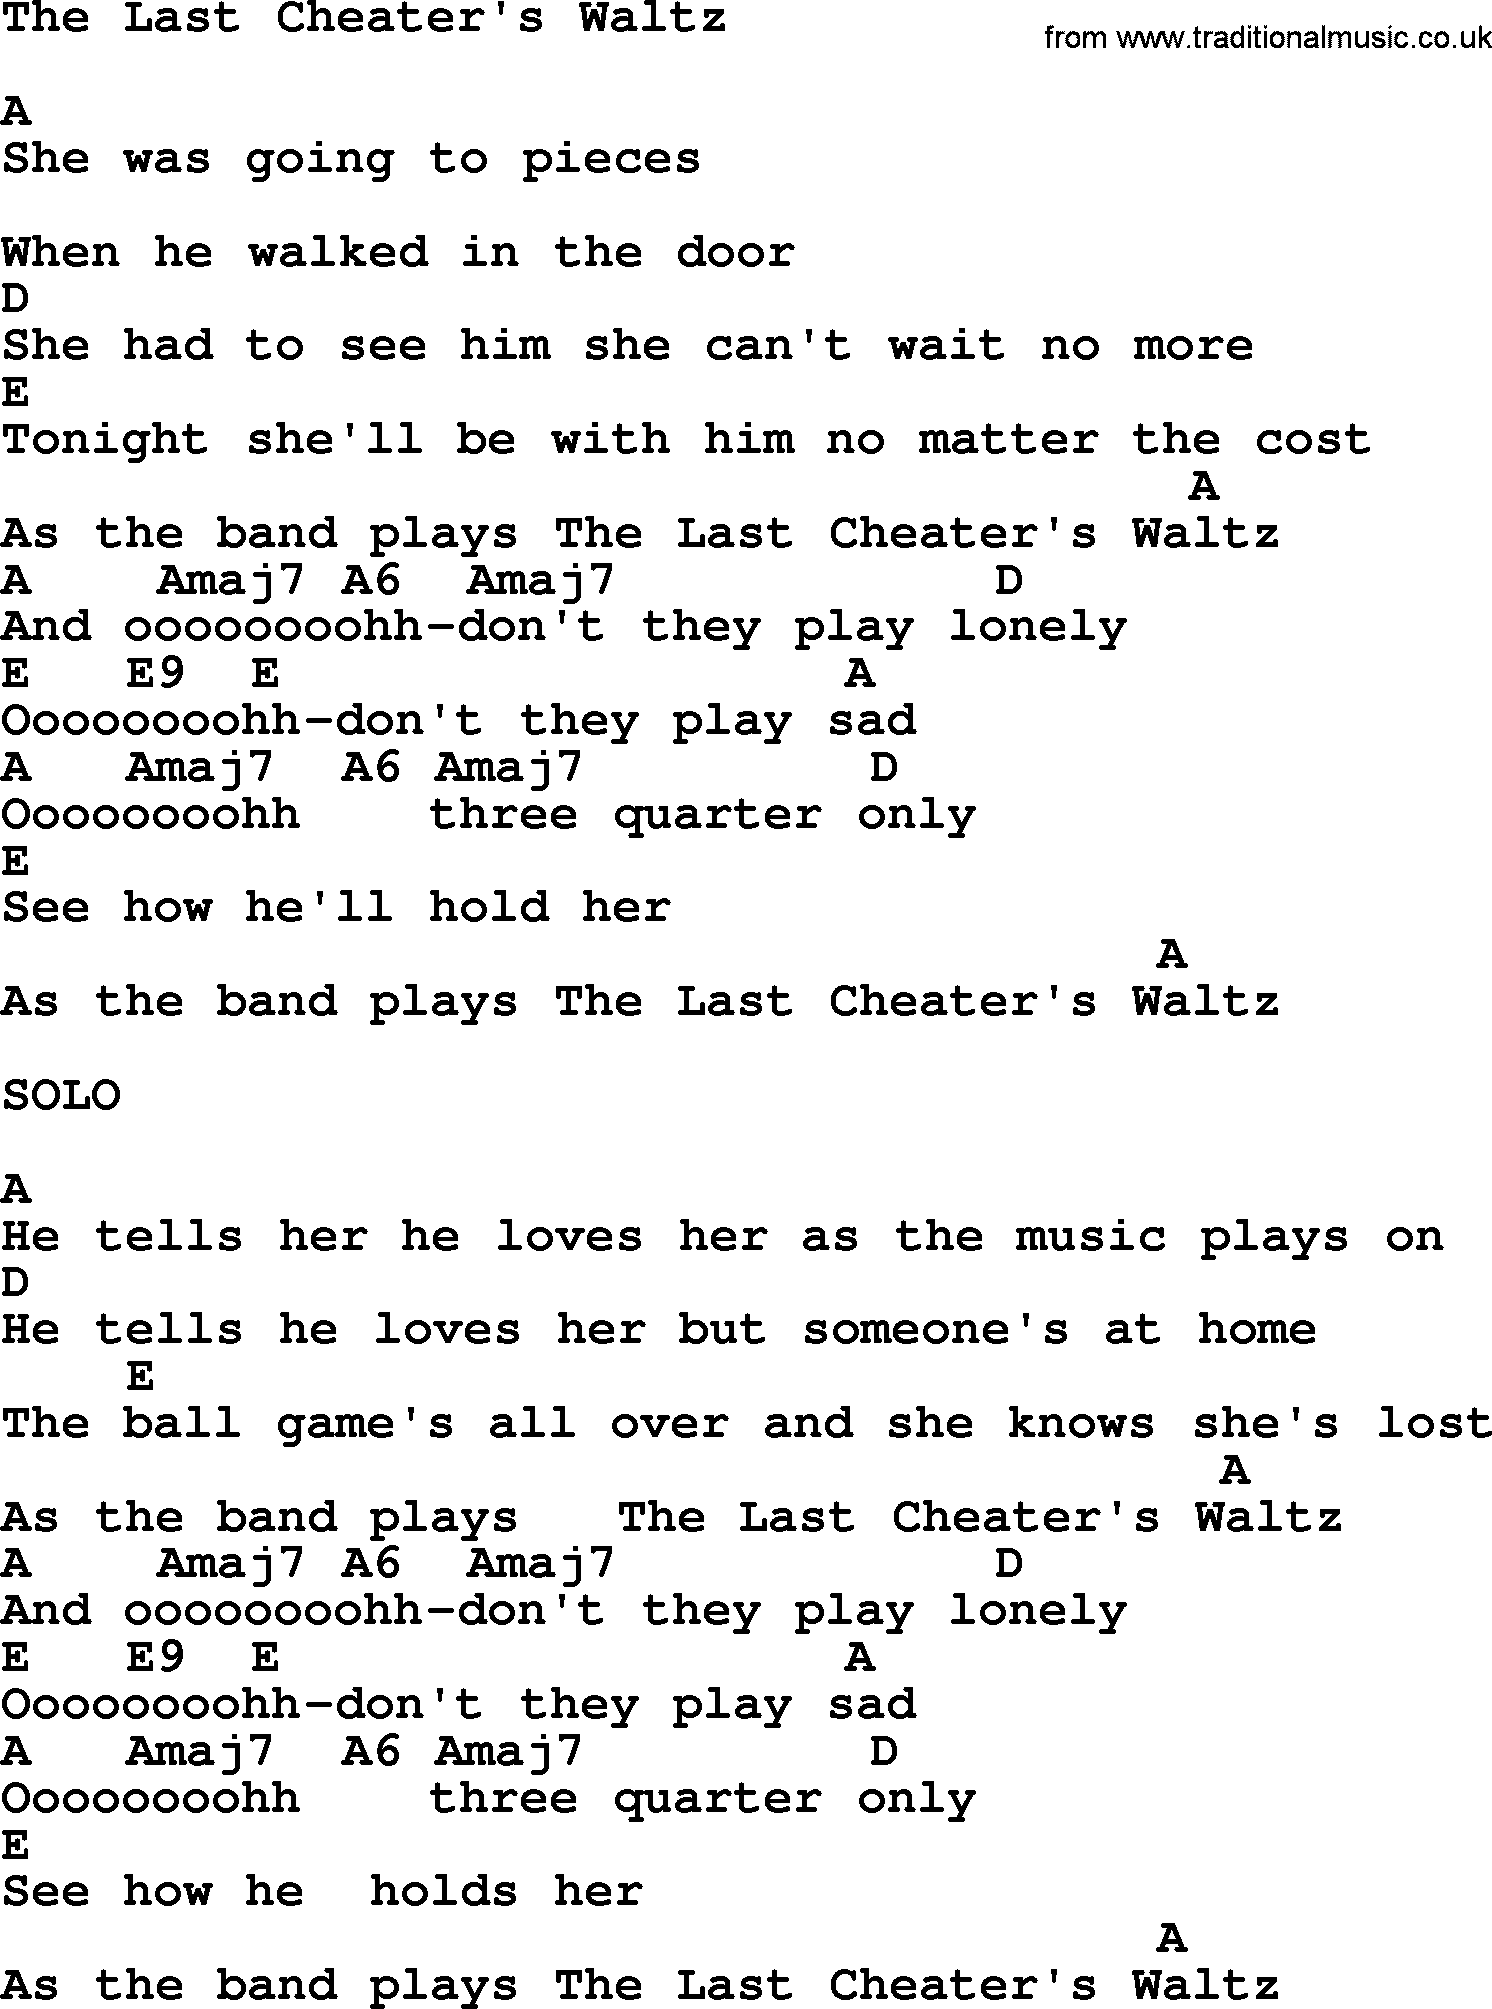 Emmylou Harris song: The Last Cheater's Waltz lyrics and chords